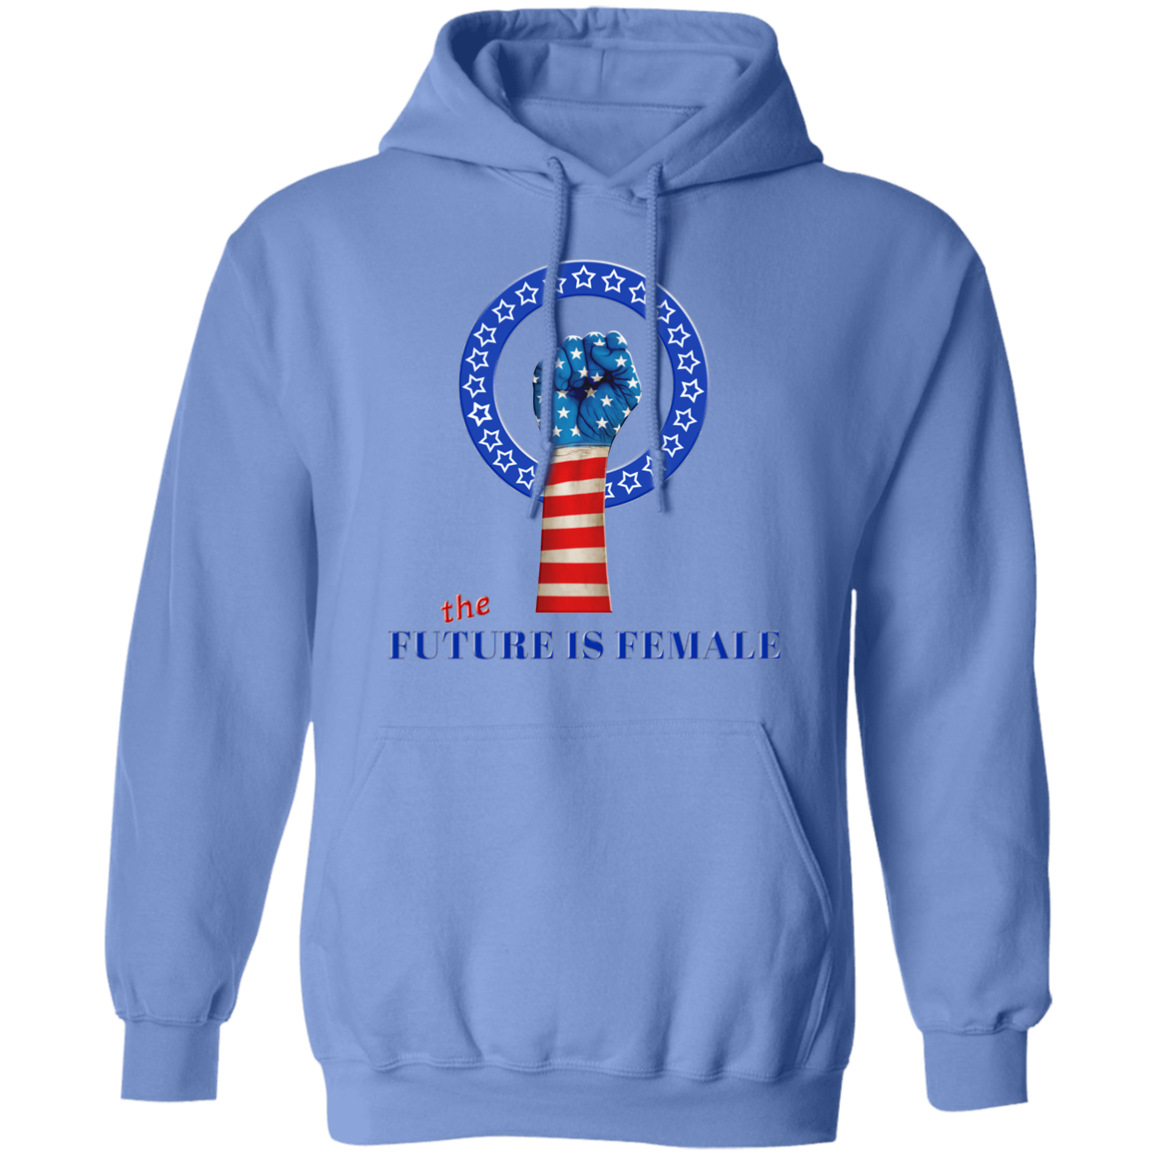 The Future Is Female - Adult Hoodie